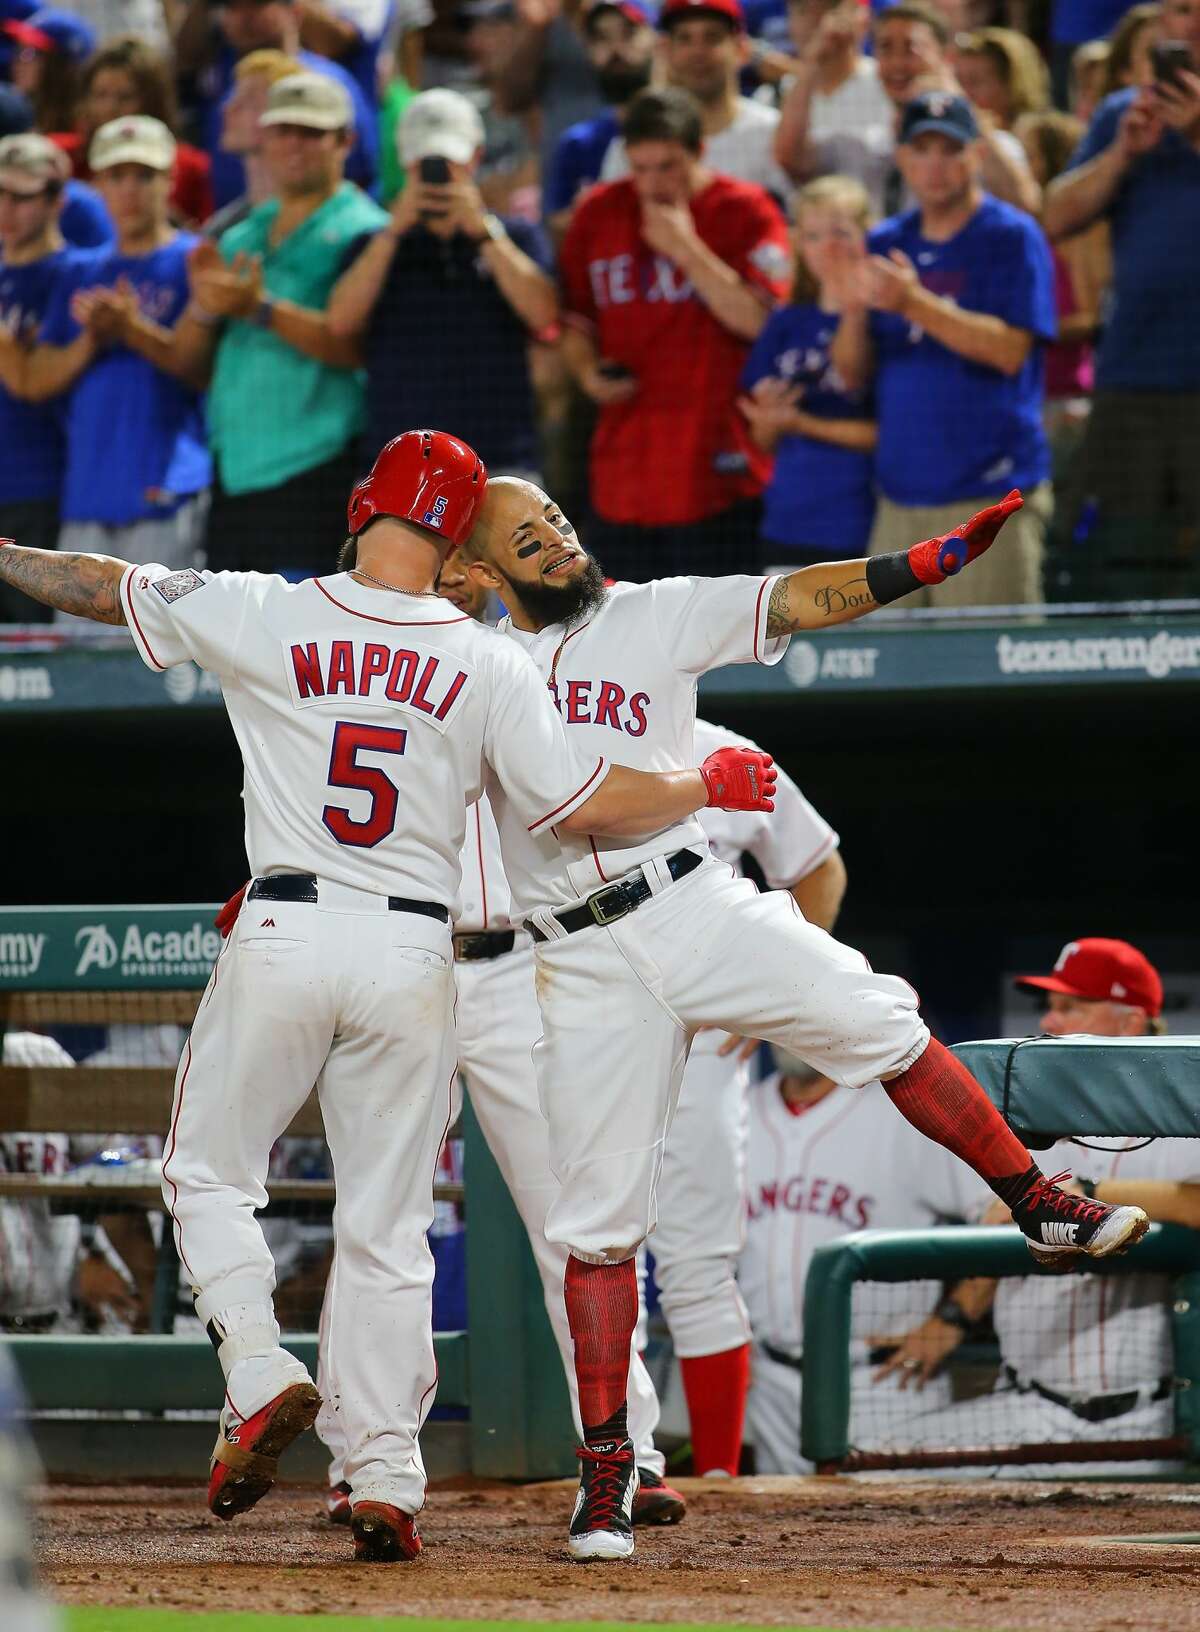 ARLINGTON, TX - AUGUST 12: Rougned Odor #12 of the Texas Rangers and Mike Napoli #5 celebrate Napoli hitting a solo home run in the fourth inning against the Houston Astros at Globe Life Park in Arlington on August 12, 2017 in Arlington, Texas. (Photo by Rick Yeatts/Getty Images)